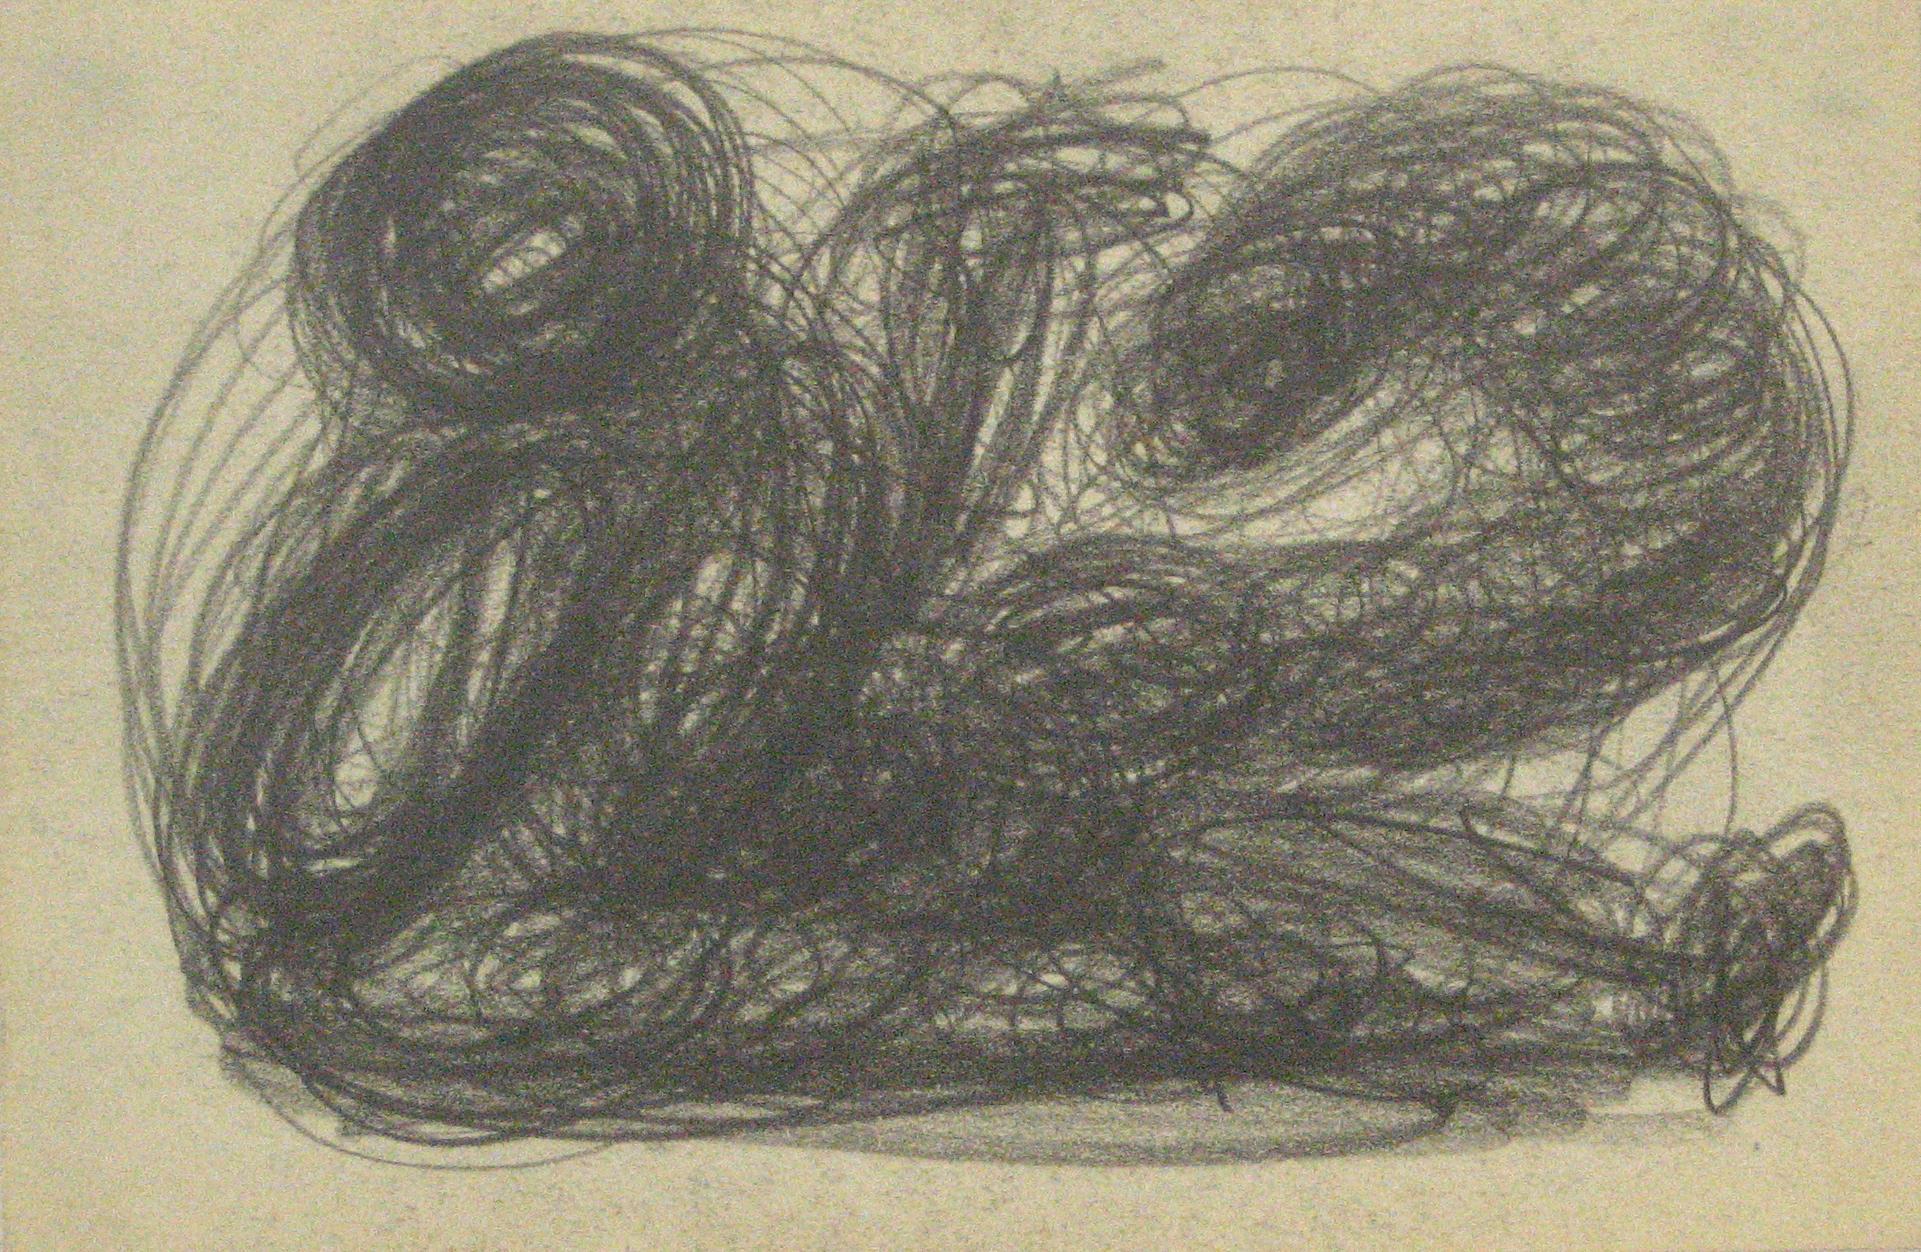 Jennings Tofel Abstract Drawing - Monochromatic Swirled Graphite Abstract, Early-Mid 20th Century